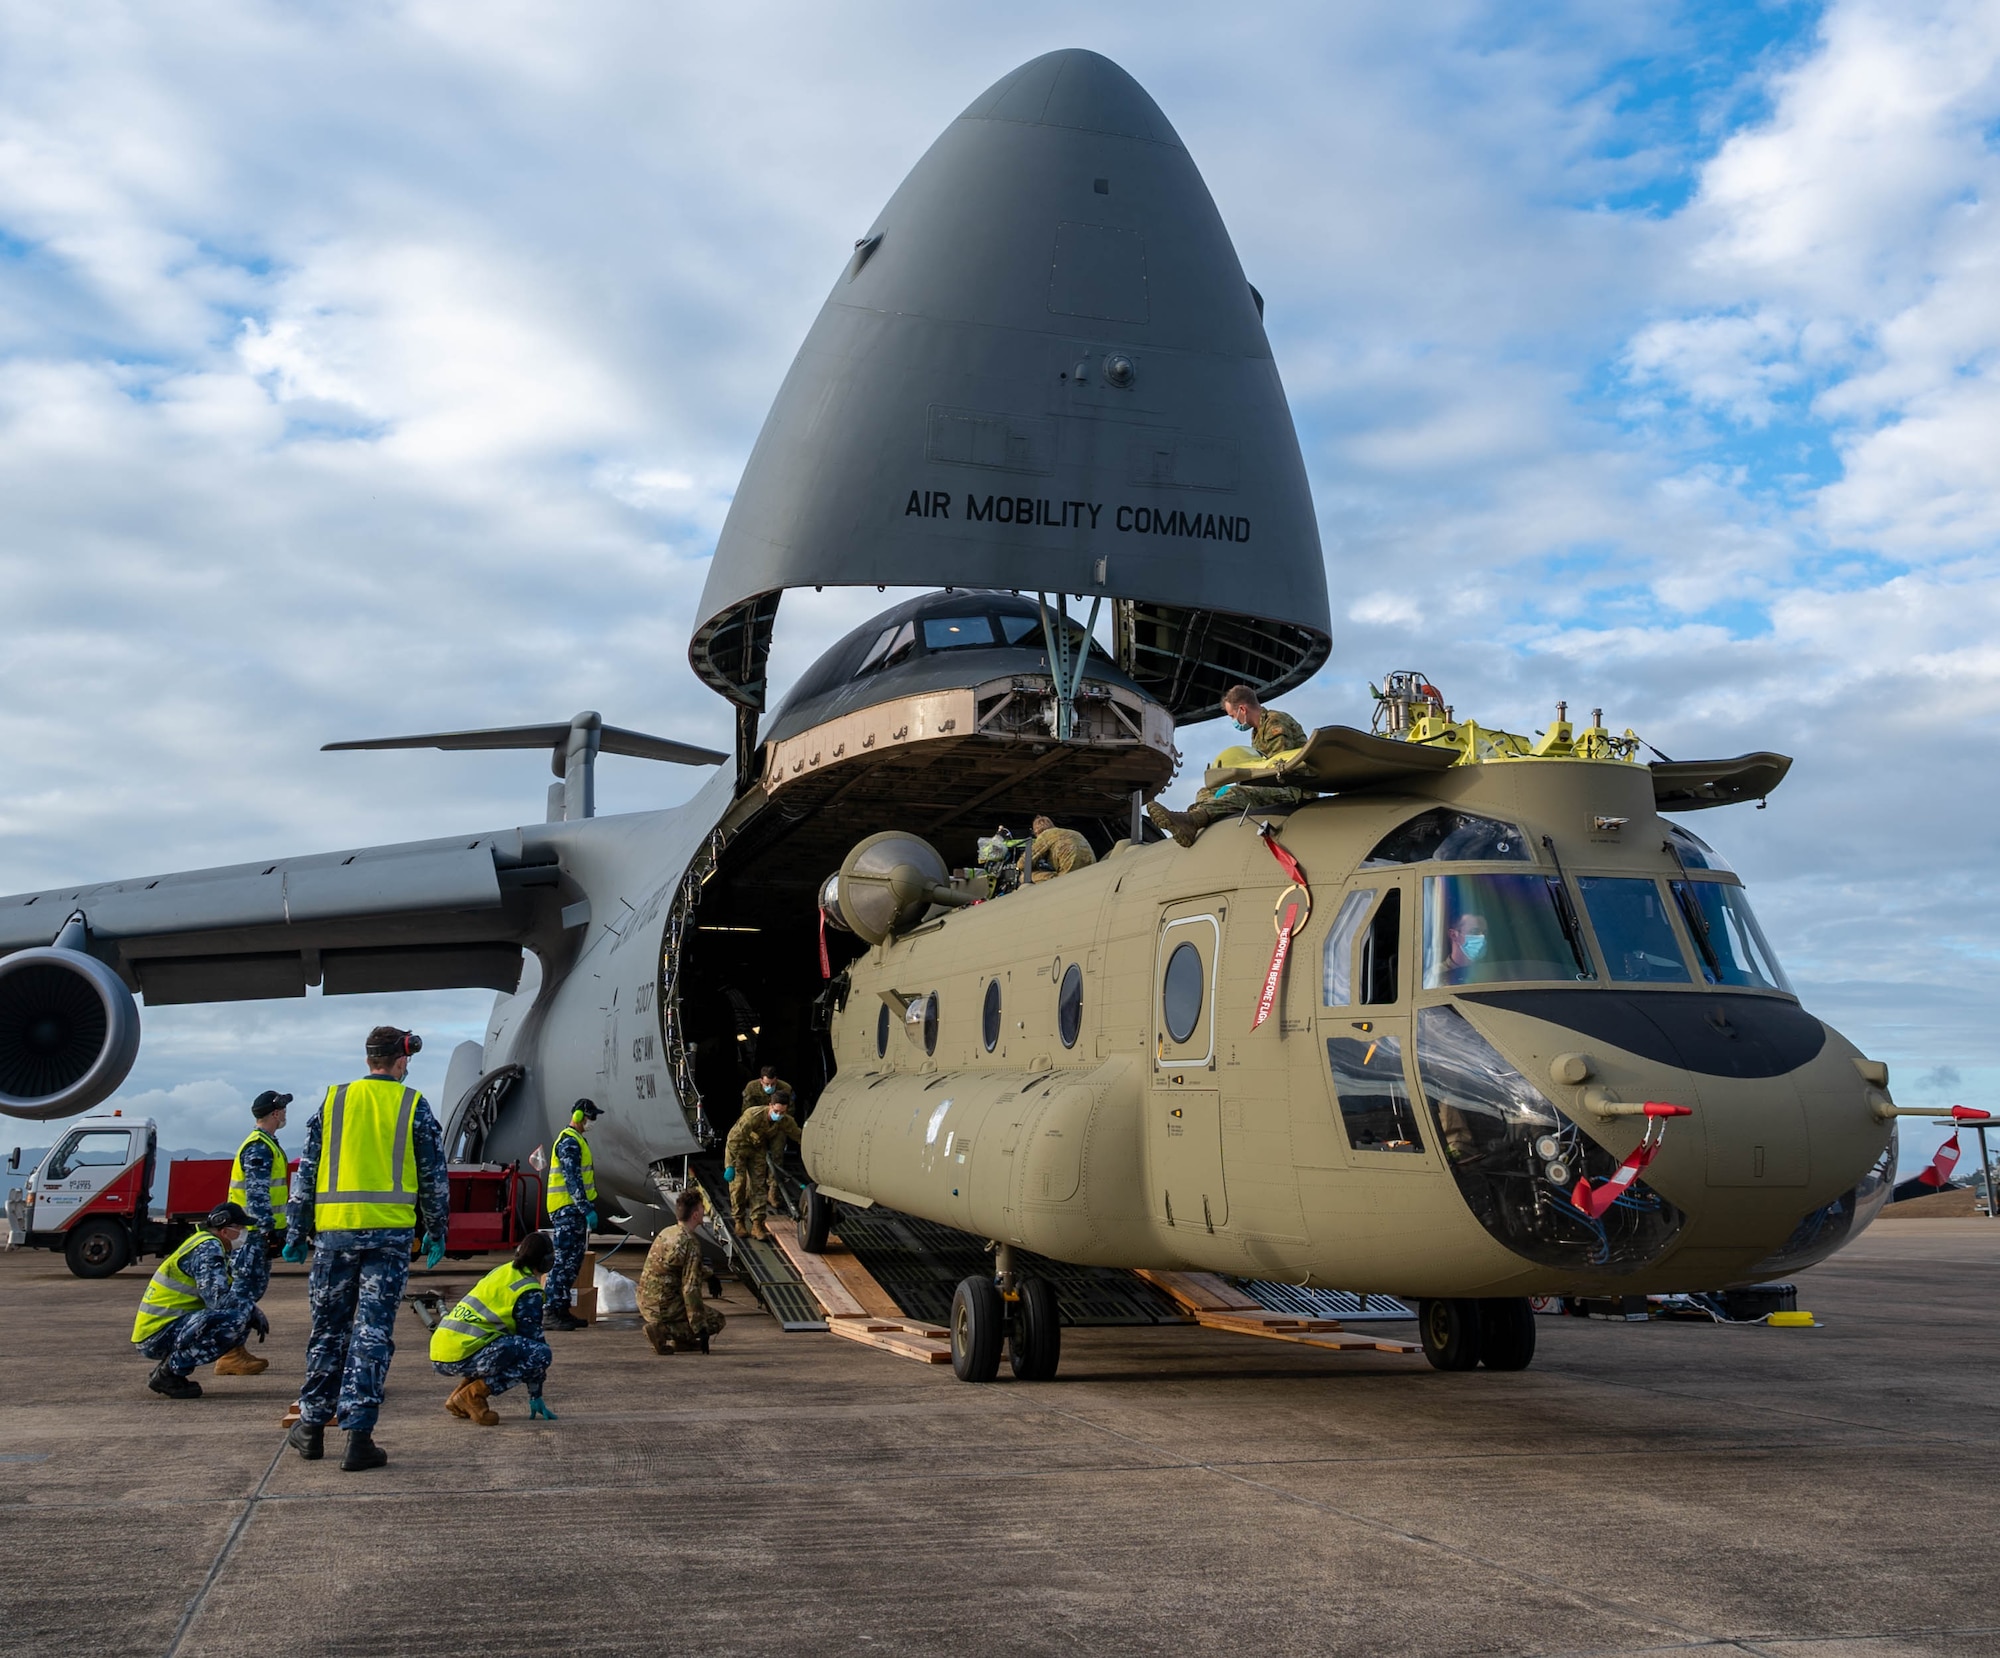 A CH-47F Chinook helicopter is unloaded from a Dover Air Force Base C-5M Super Galaxy at Royal Australian Air Force Base Townsville, Australia, July 7, 2021. The C-5 transported two CH-47F Chinook helicopters to RAAF Base Townsville as a part of the Department of Defense’s Foreign Military Sales program. The U.S. and Australia maintain a robust relationship underpinned by shared democratic values, common interests and cultural bonds. The strong alliance is an anchor for peace and stability in the Indo-Pacific region and around the world. (U.S. Air Force photo by Senior Airman Faith Schaefer)